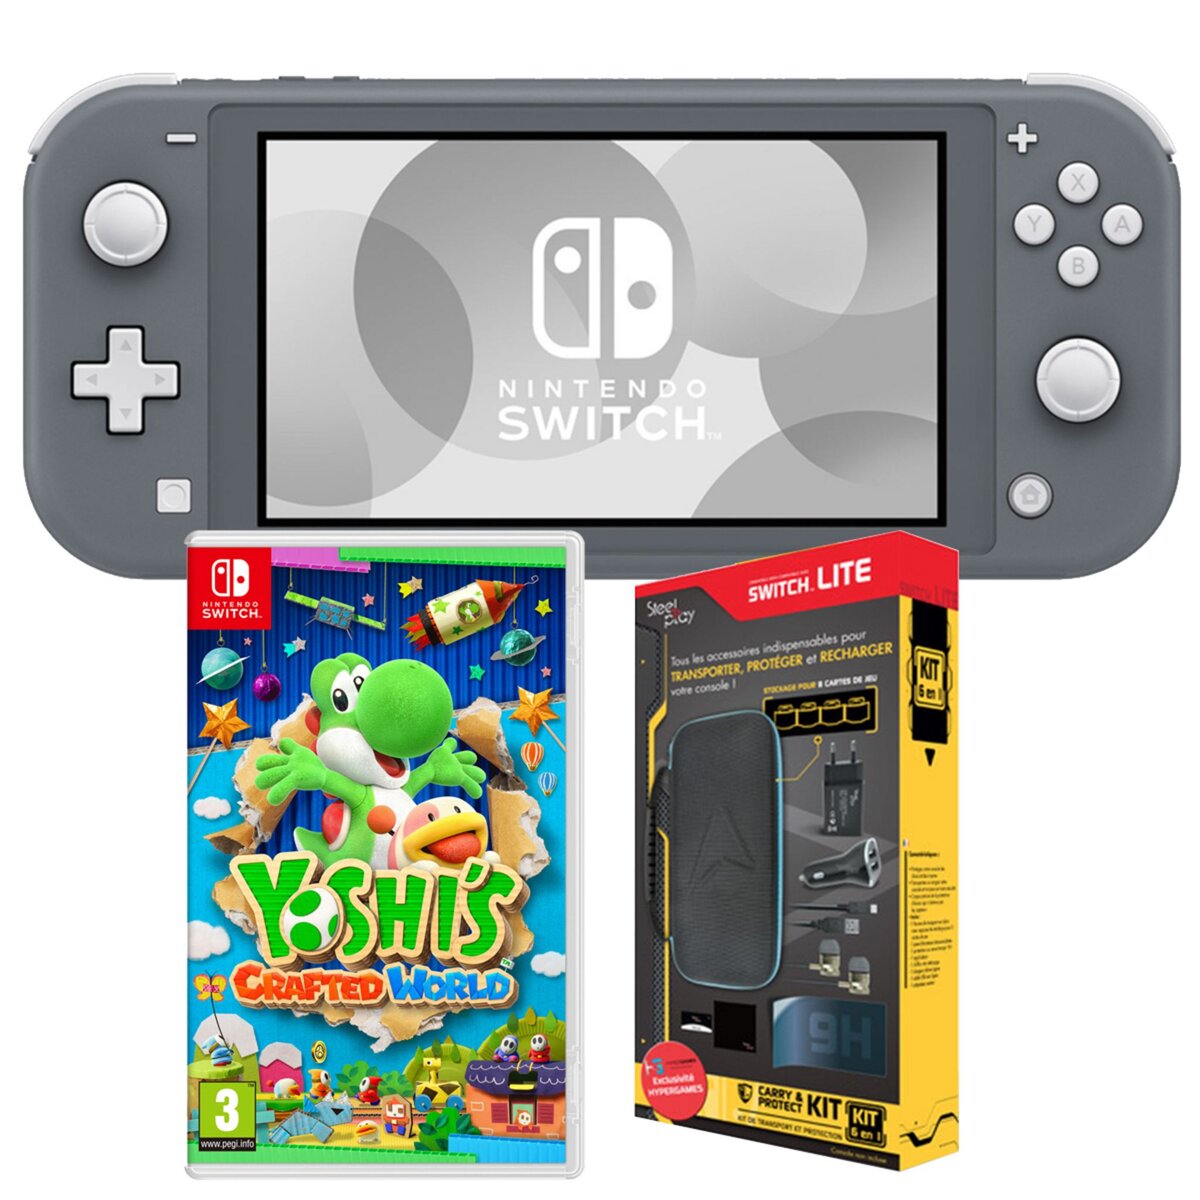 NINTENDO EXCLU WEB Console Nintendo Switch Lite Grise + Yoshi's Crafted + Pack accessoires exclusif Auchan